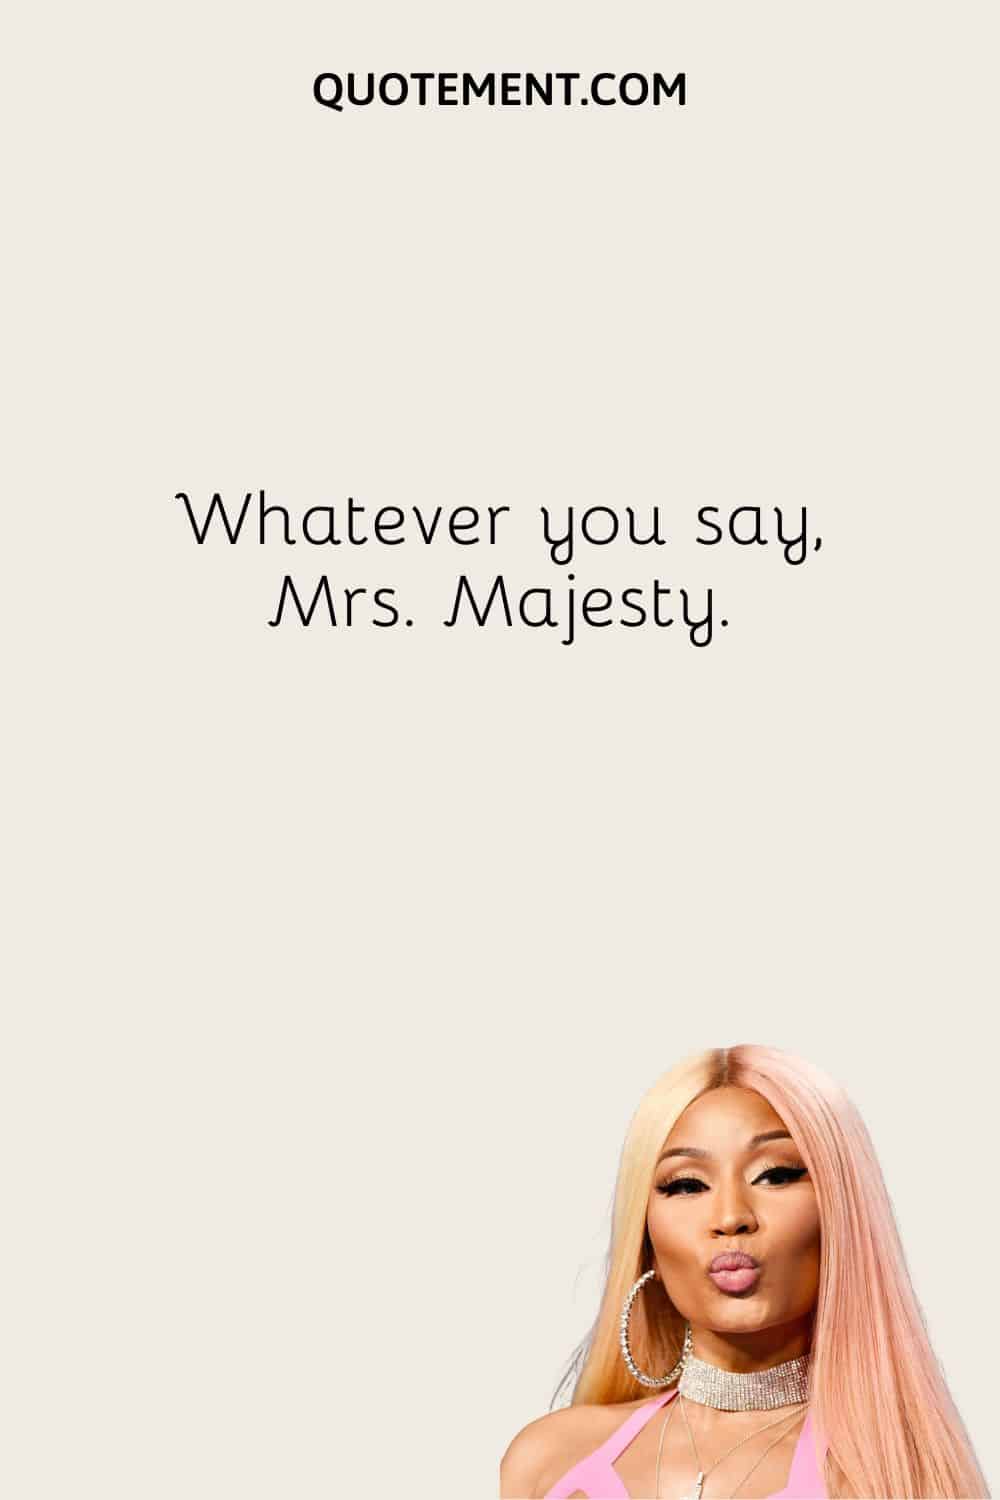 Whatever you say, Mrs. Majesty